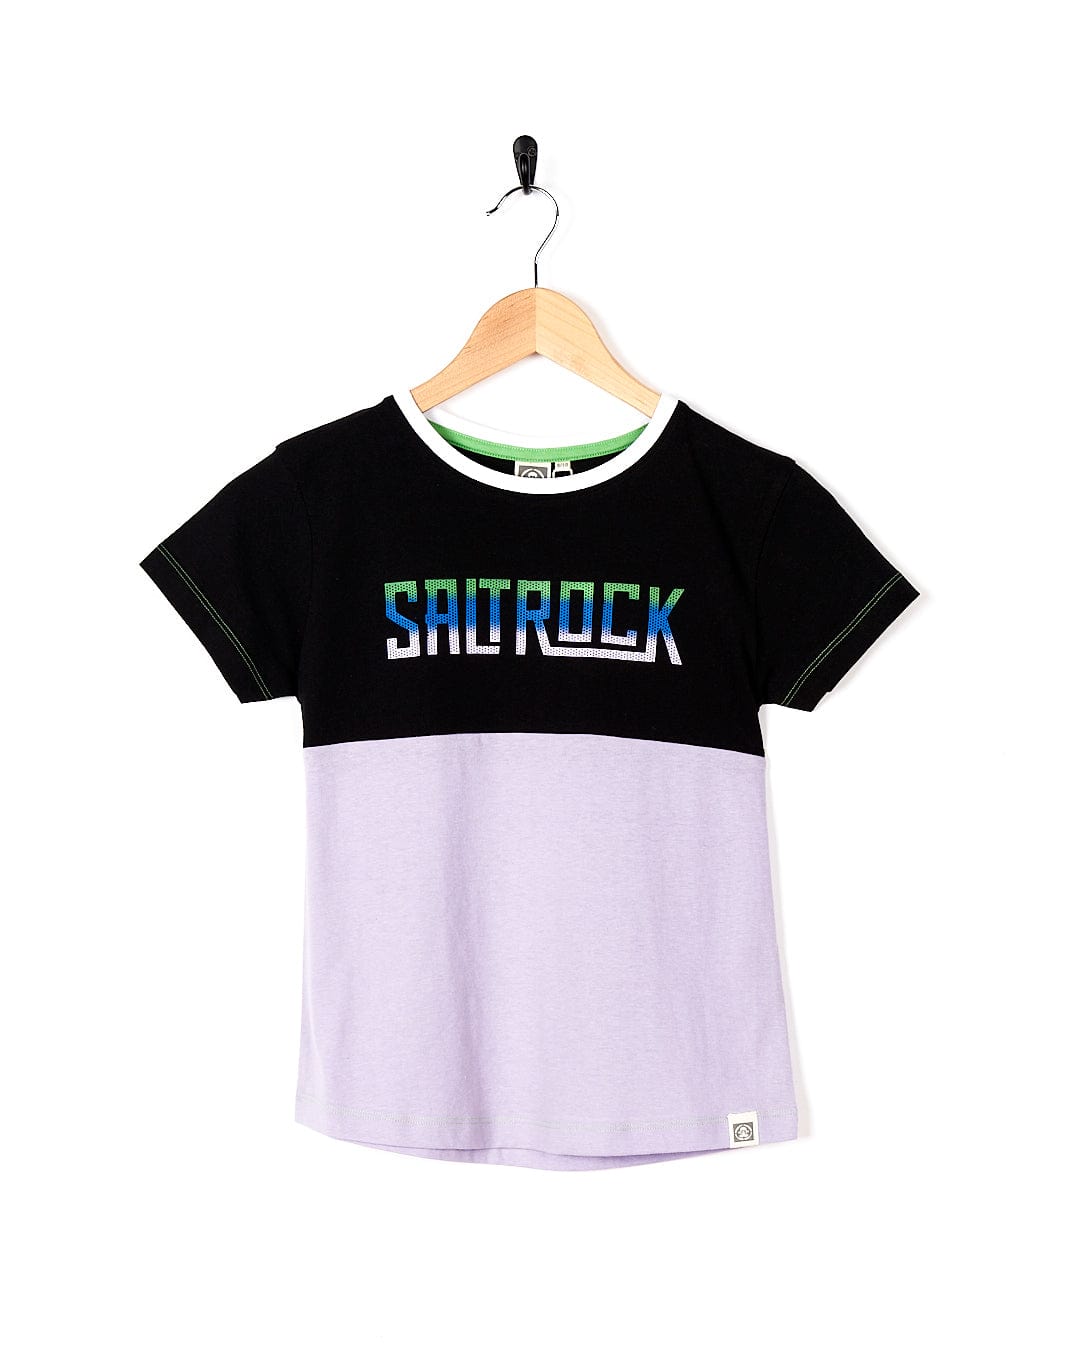 A Samarria Tex - Kids Short Sleeve T-Shirt - Light Purple from Saltrock with the word sarock on it.